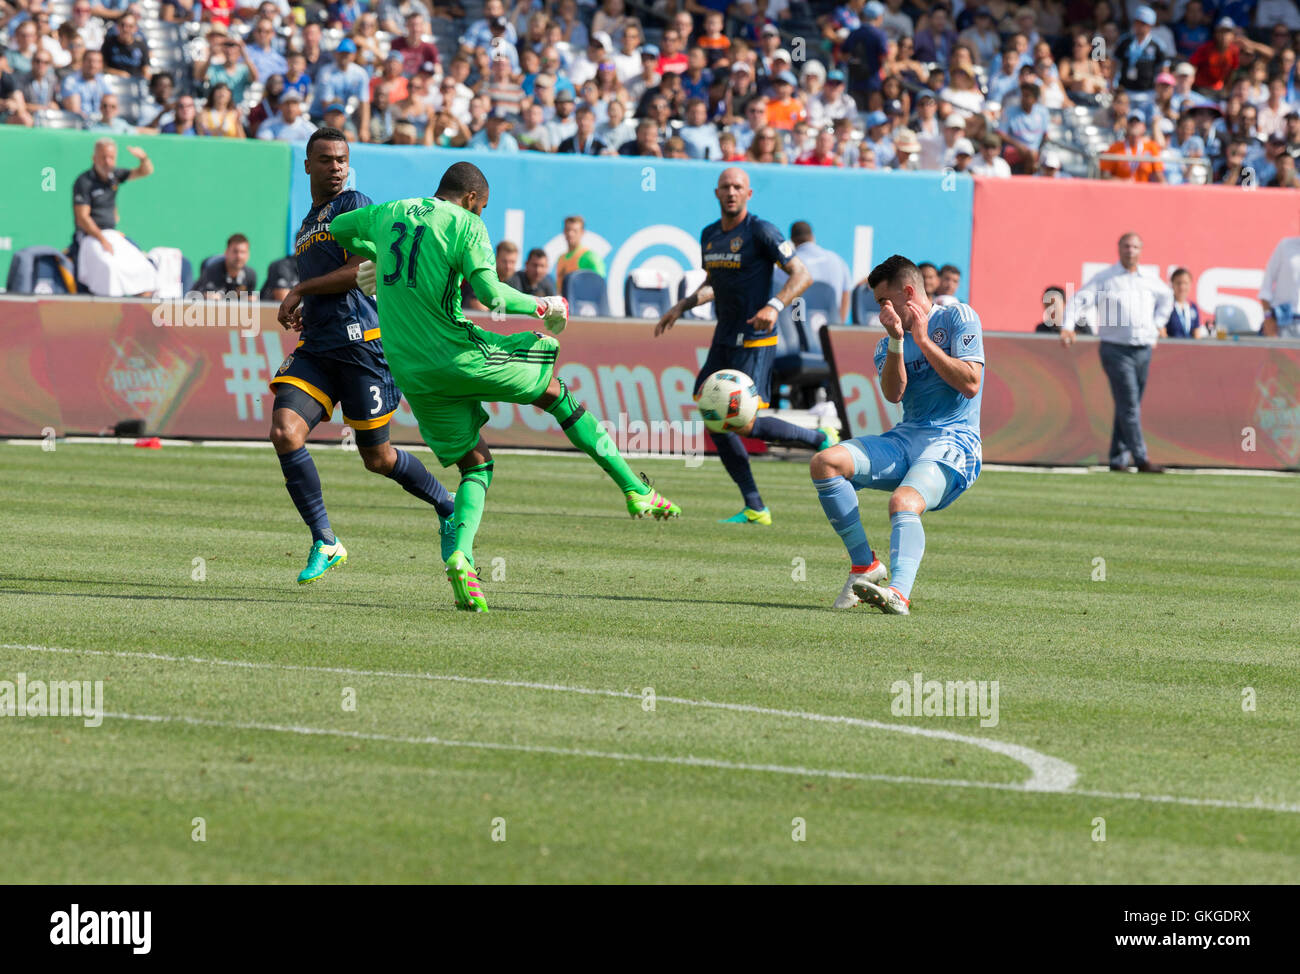 New York, NY USA - August 20, 2016: Goalkeeper Clement Diop (31) of LA Galaxy saves ball during MLS match against NYC FC on Yankees stadium Credit:  lev radin/Alamy Live News Stock Photo